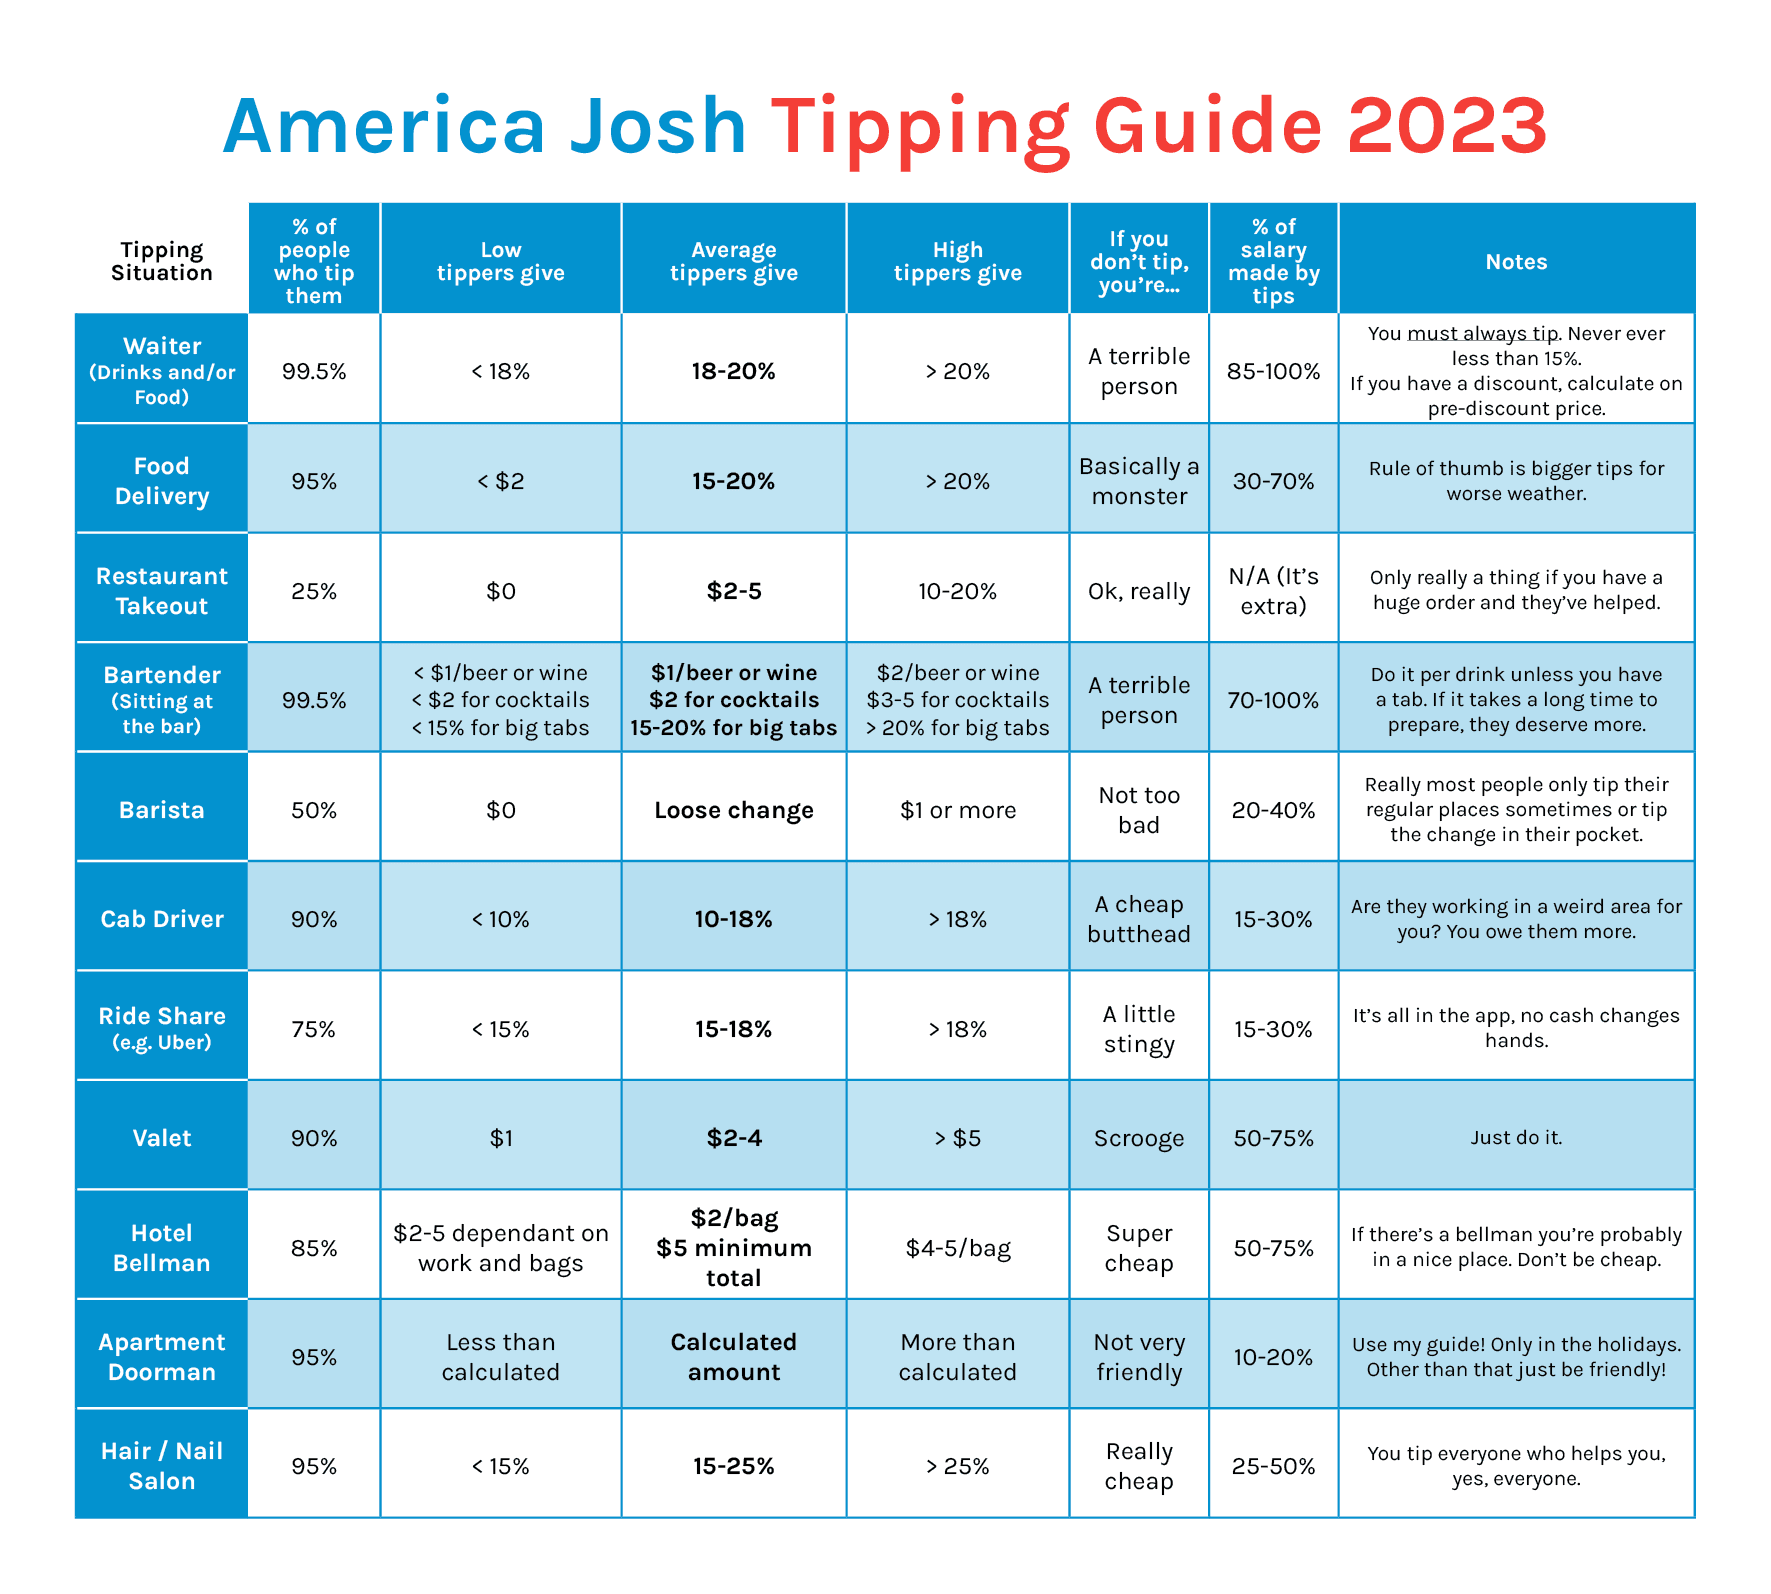 tipping tour guides america